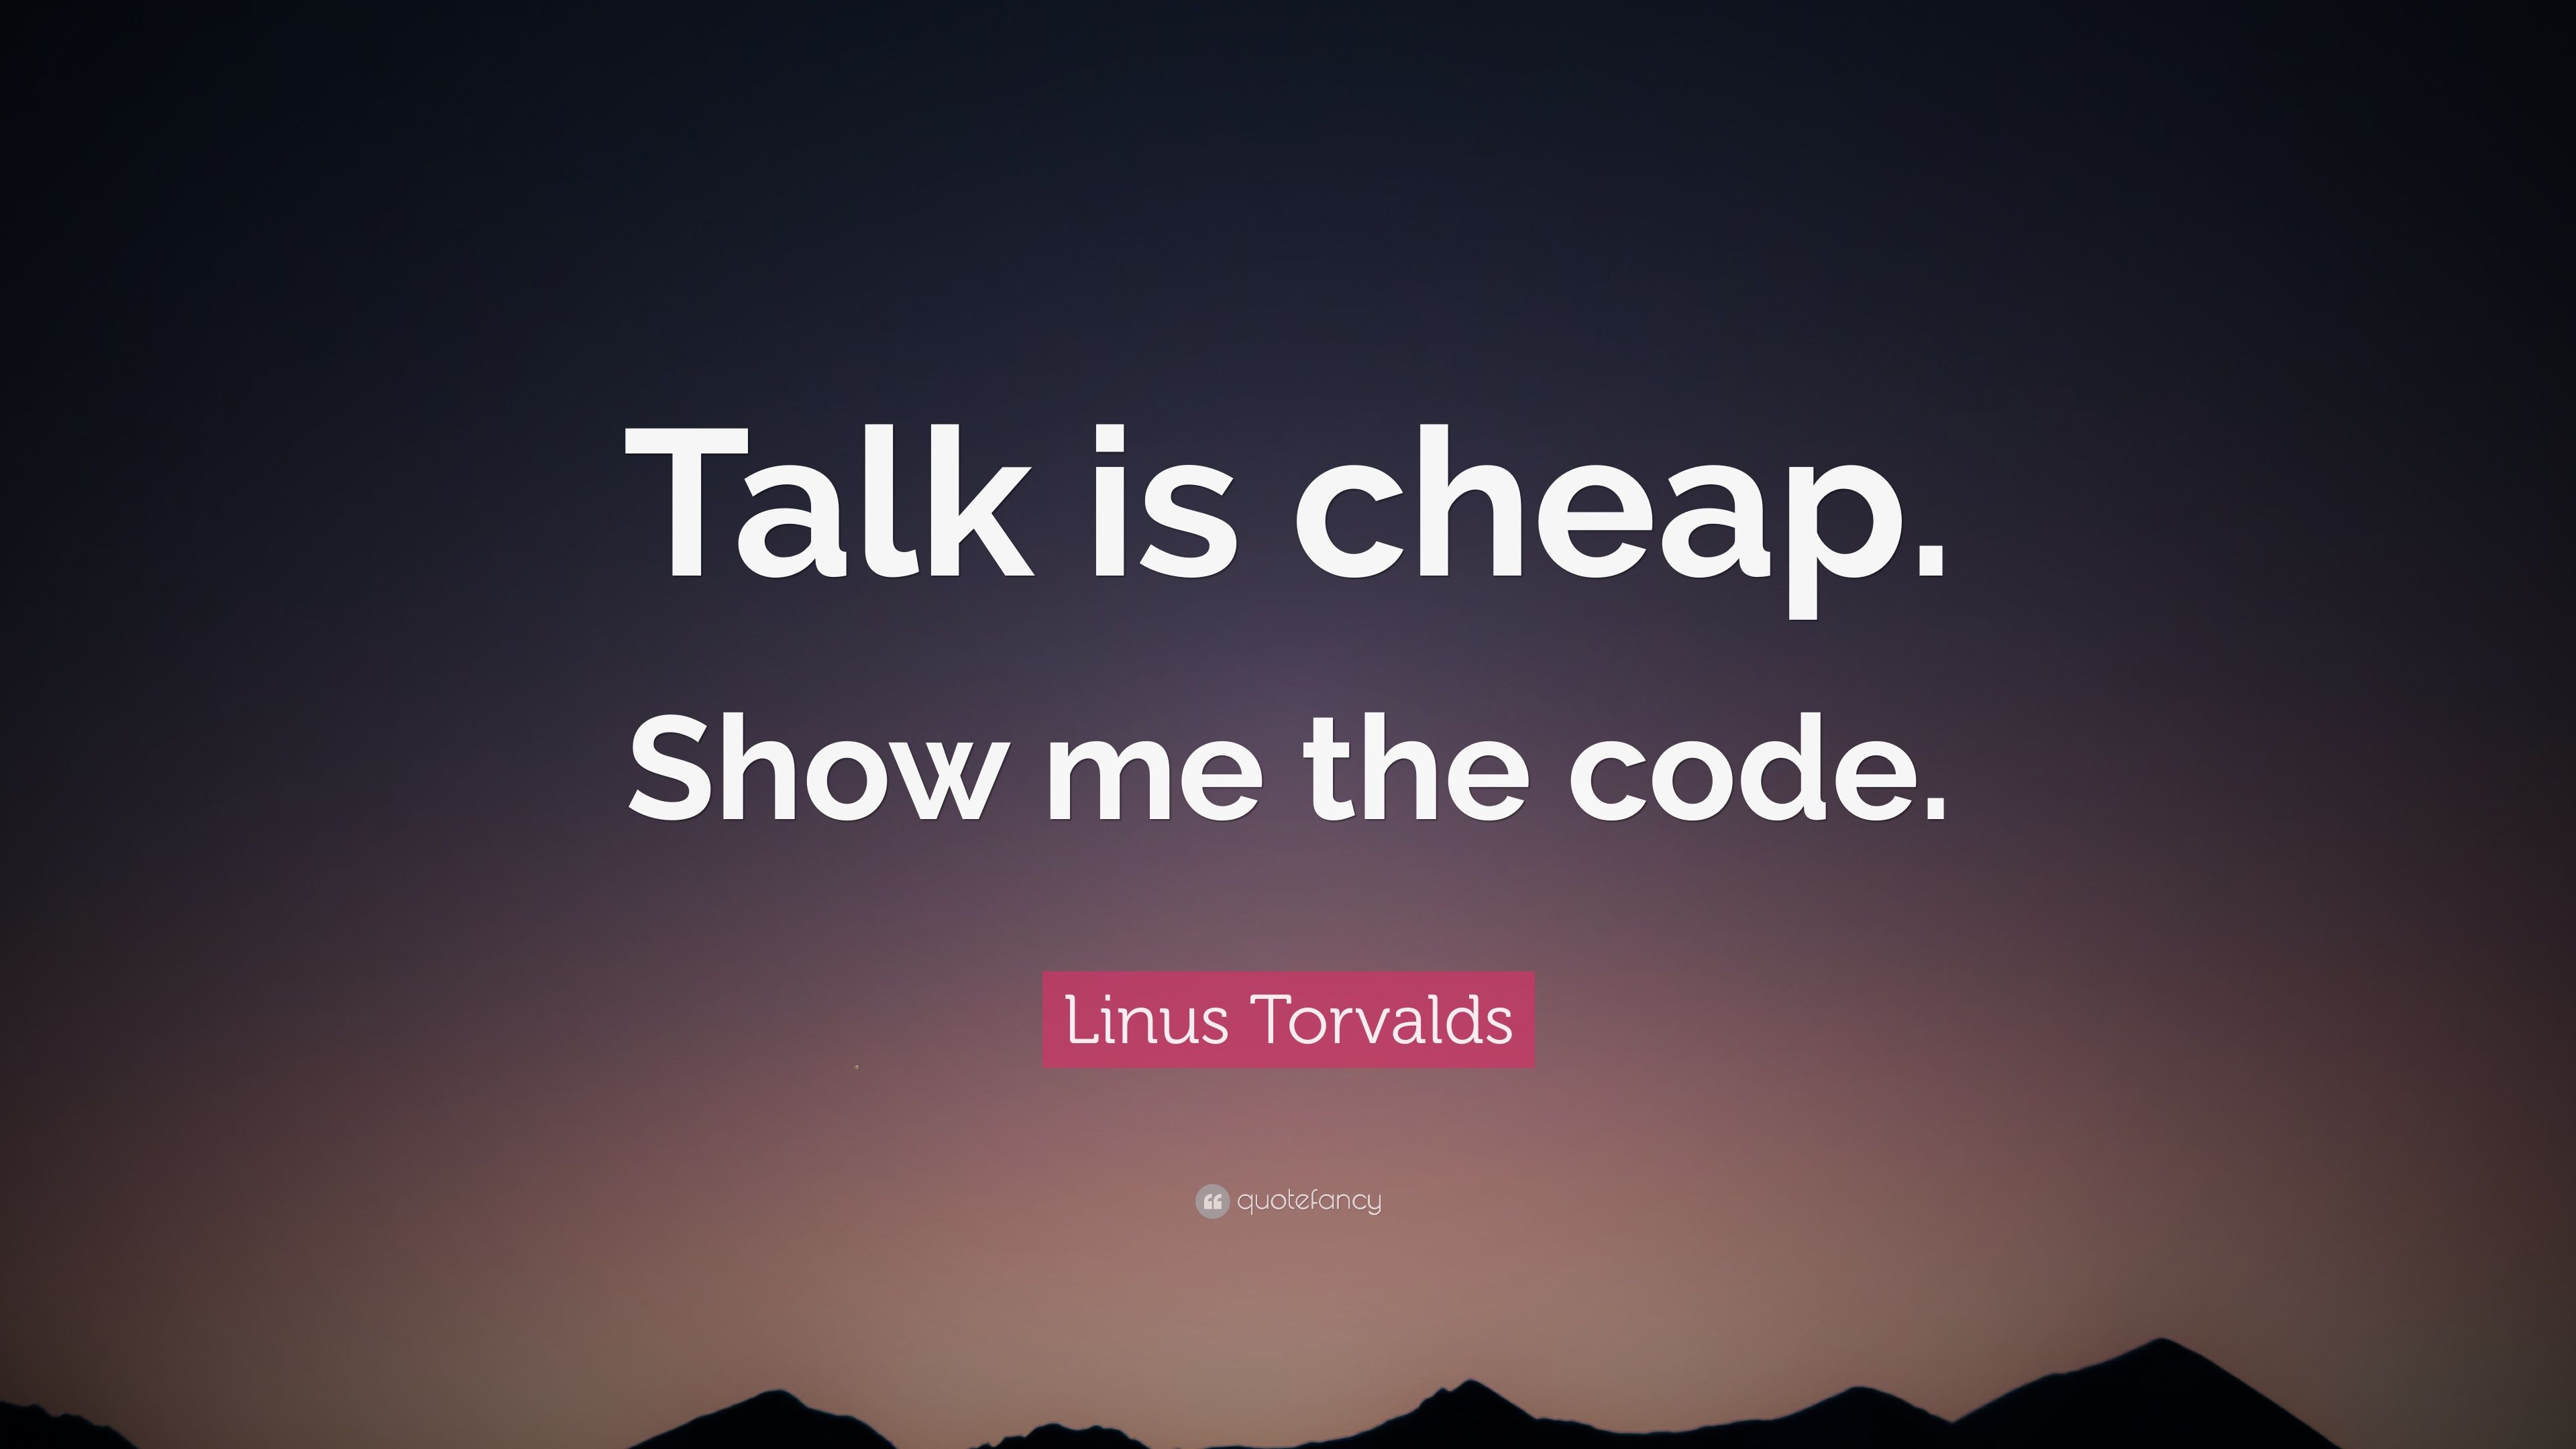 Linus Torvalds Quote: “Talk is cheap. Show me the code.” 14